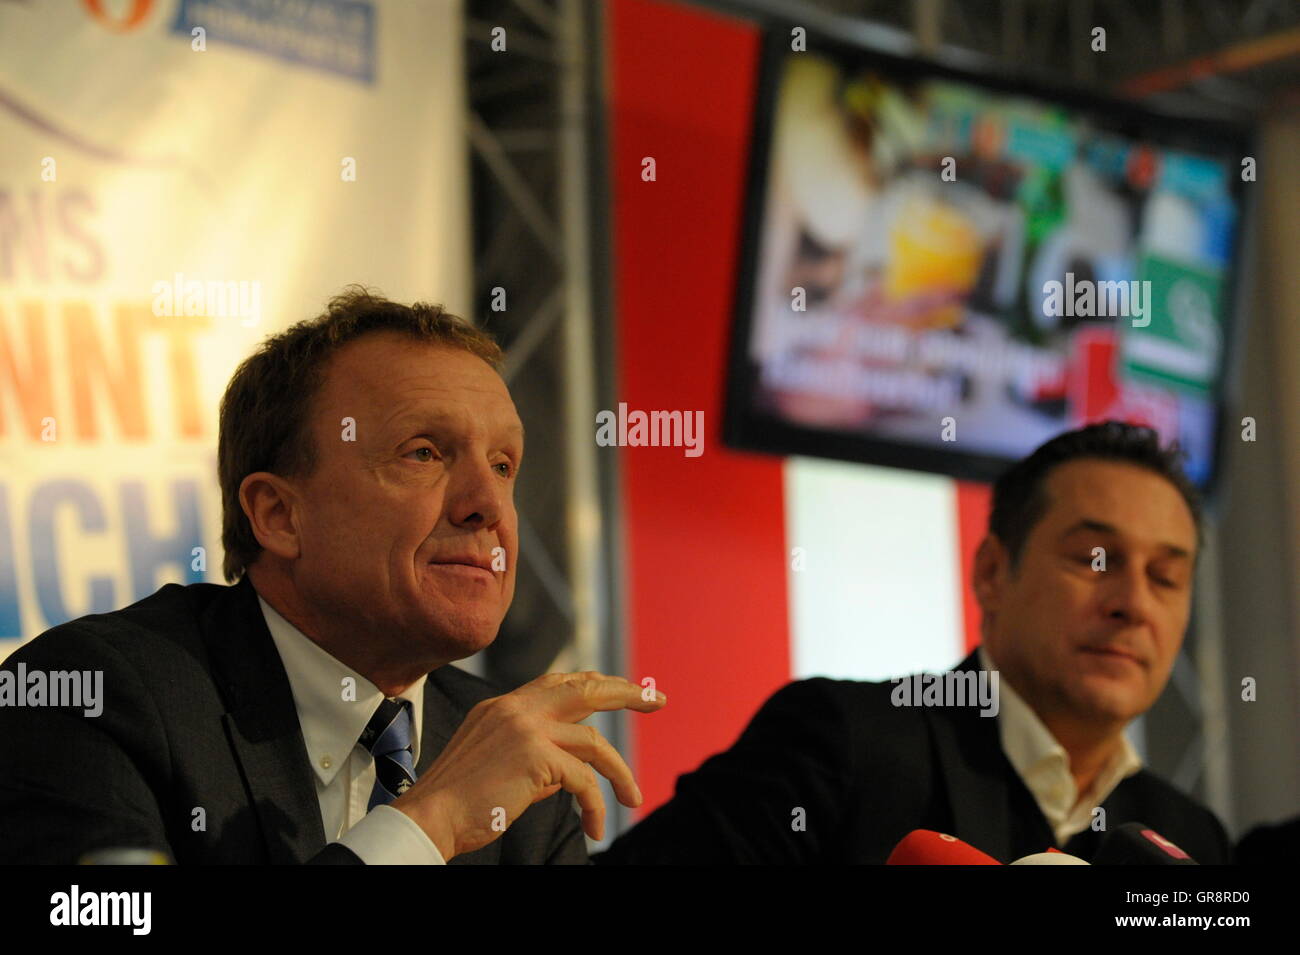 Press Conference Of The Fpö With Pro-Sme-President Br Master Reinhard Pisec And H.C. Strache Stock Photo